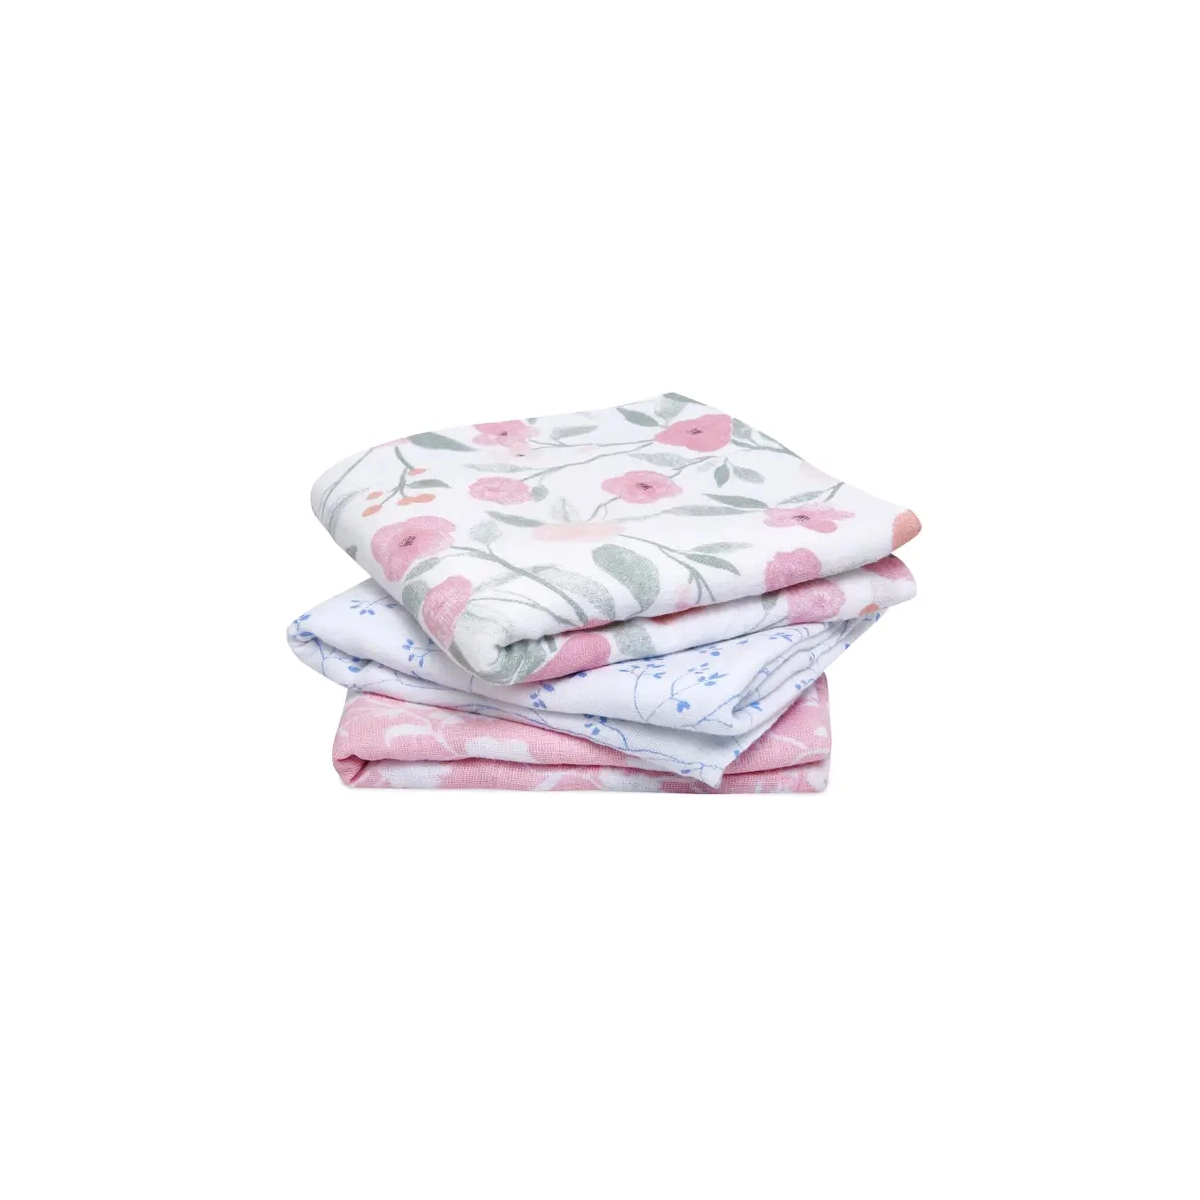 Aden + Anais Pack of 3 Musy Squares Cotton Muslin